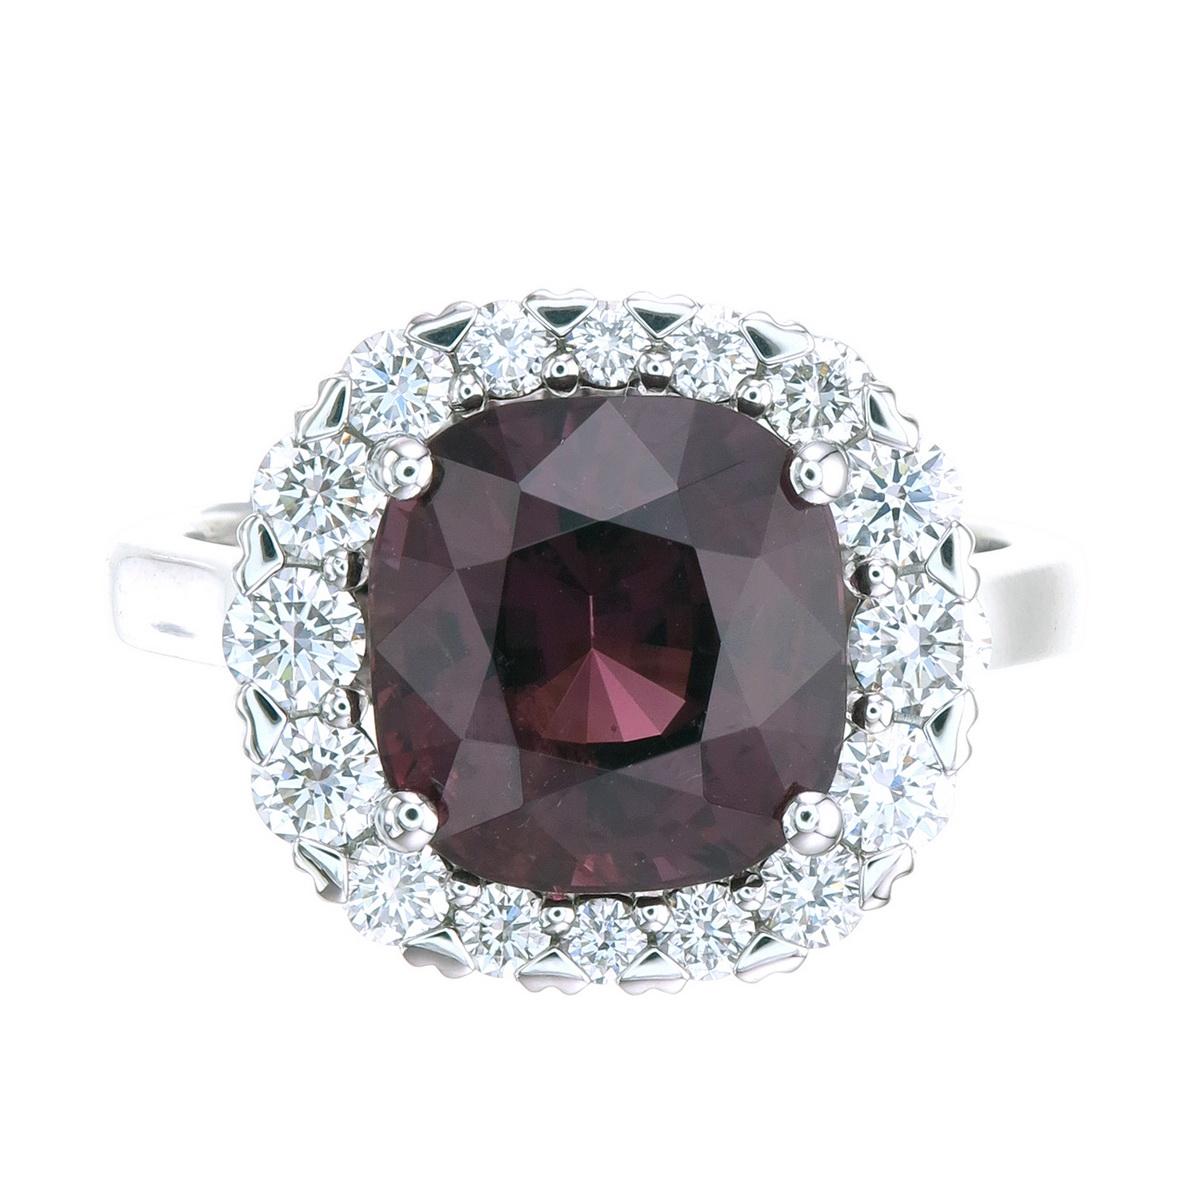 Orloff of Denmark's own; 'Sanguine Cherry'
5.19 carat red Spinel set in 950 platinum. A floral crown of gorgeous VS1, D-F diamonds enclave upon the center ring bringing an entire ensemble of bright brilliance and fiery sparkle.
This center stone